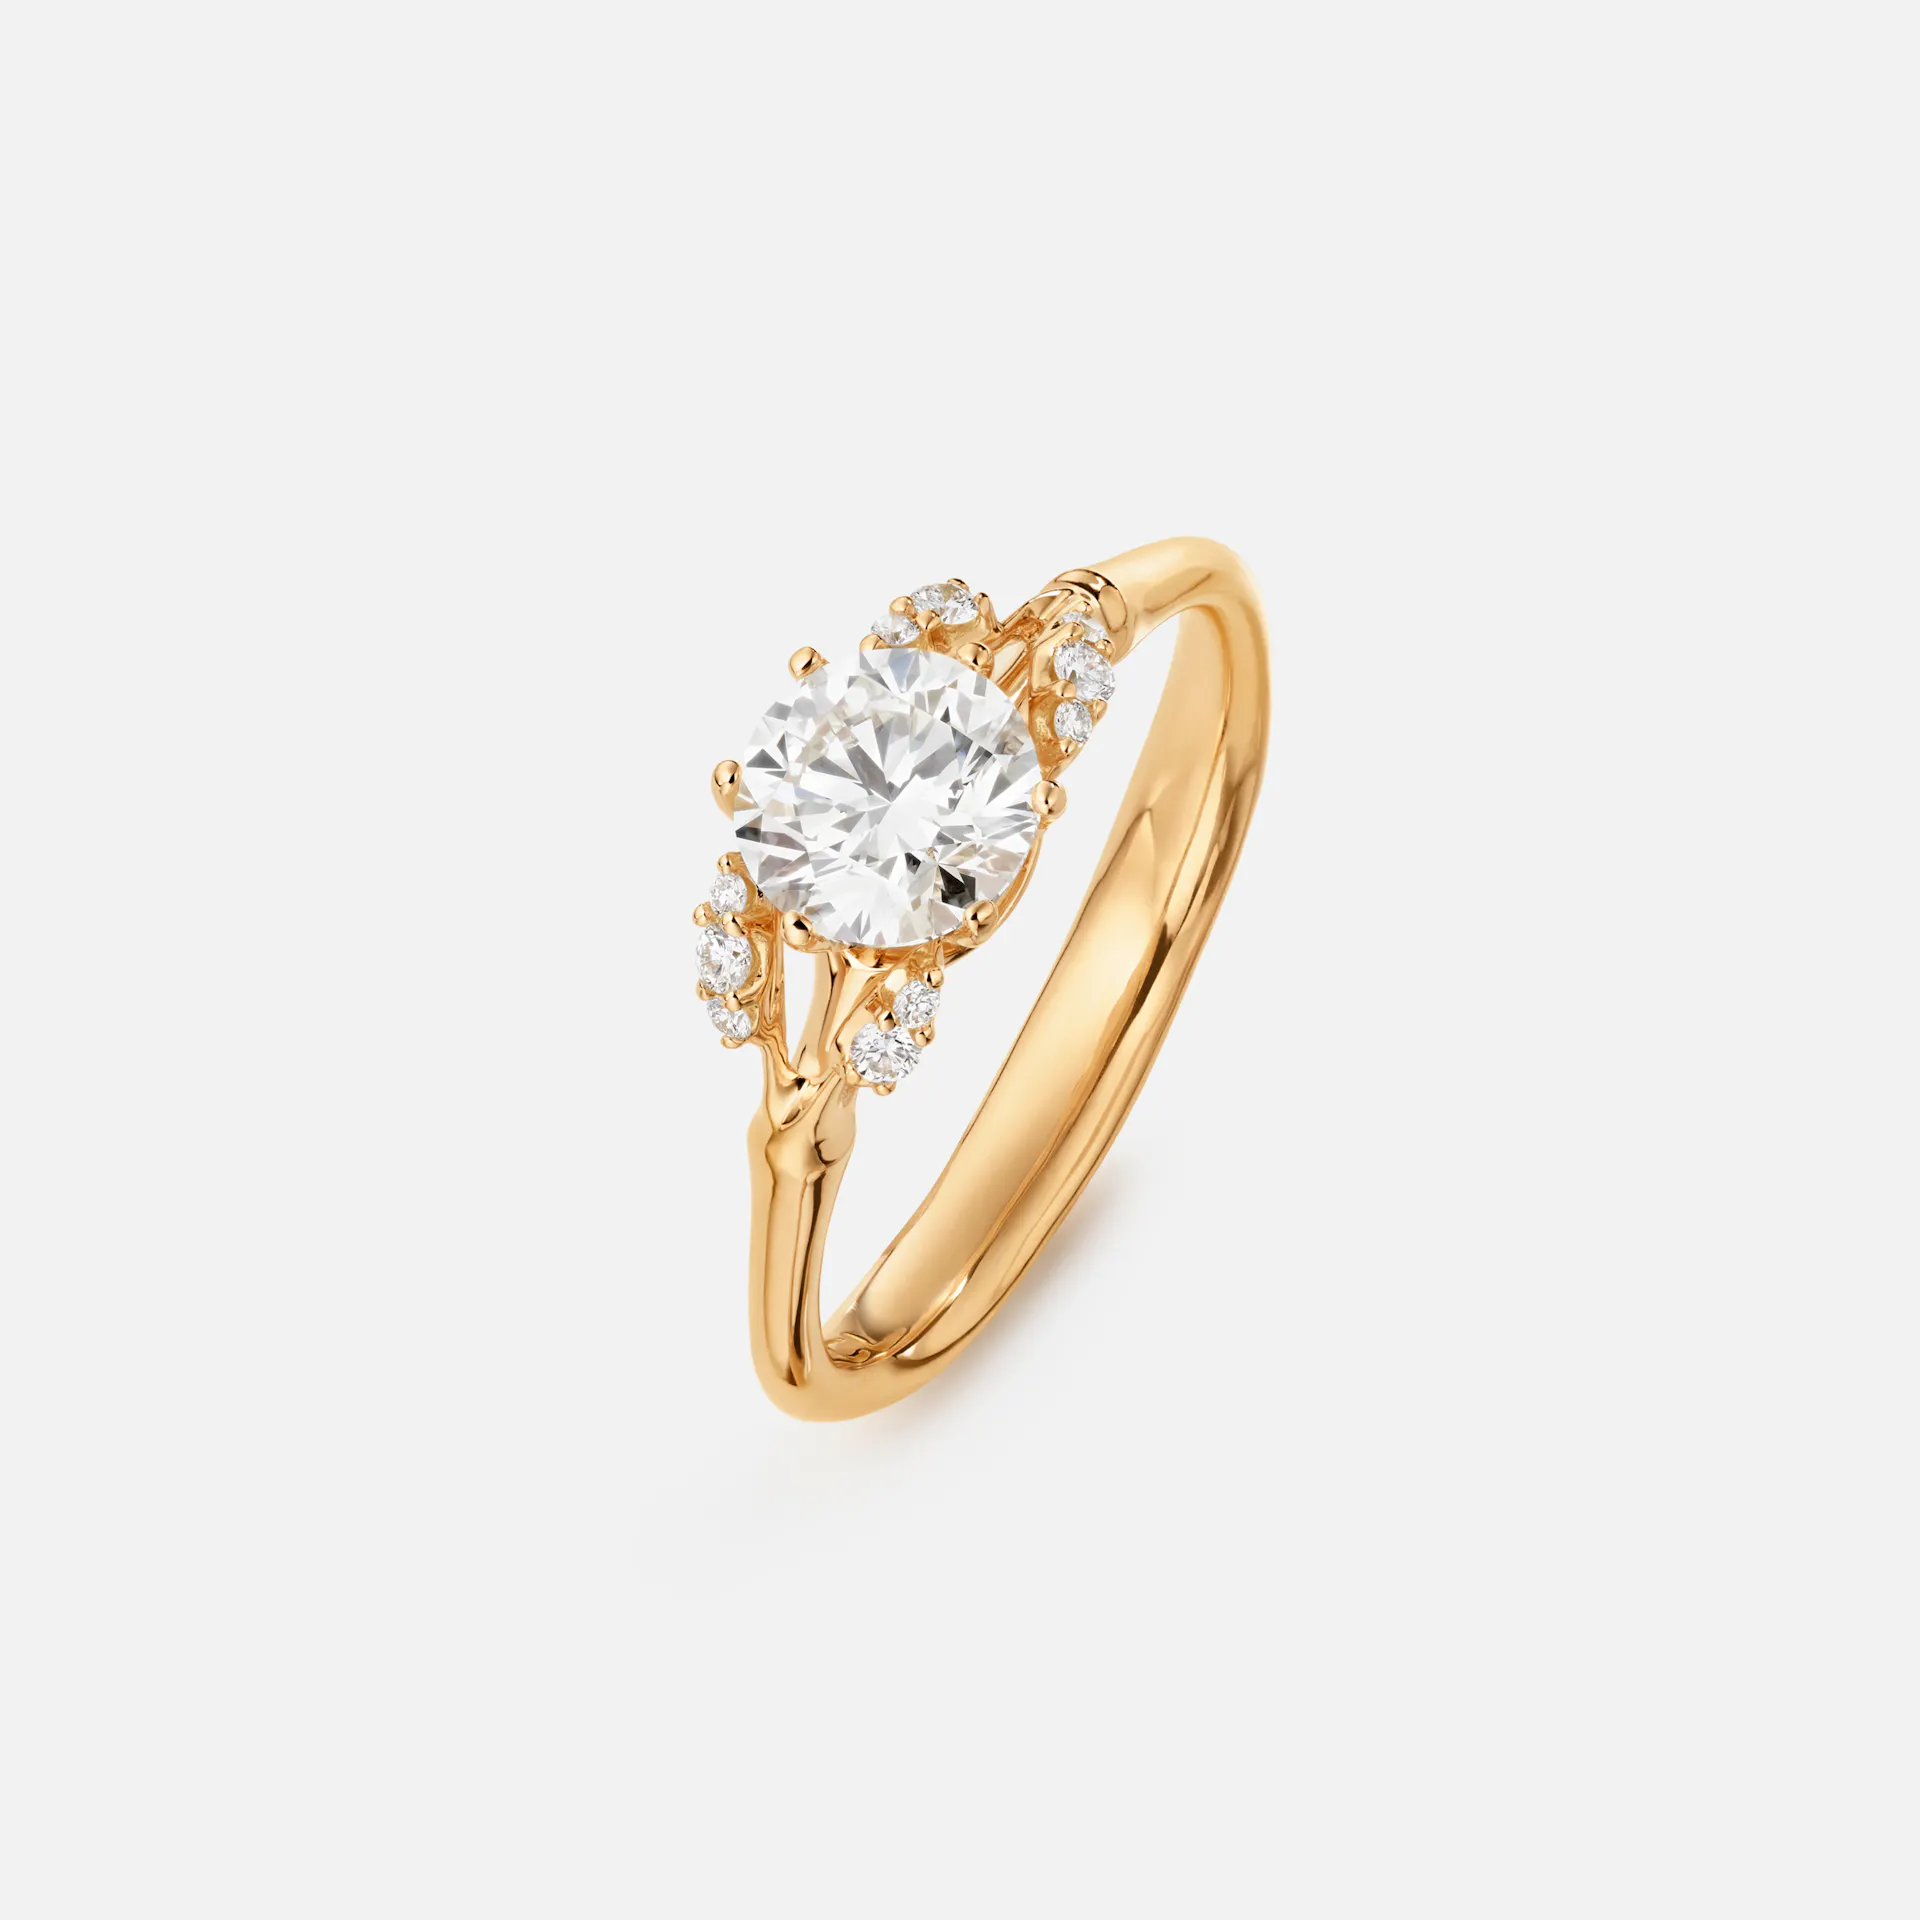 Ole Lynggaard Vinter frost solitaire ring A2781-423 18 kt 55 - Ole Lynggaard